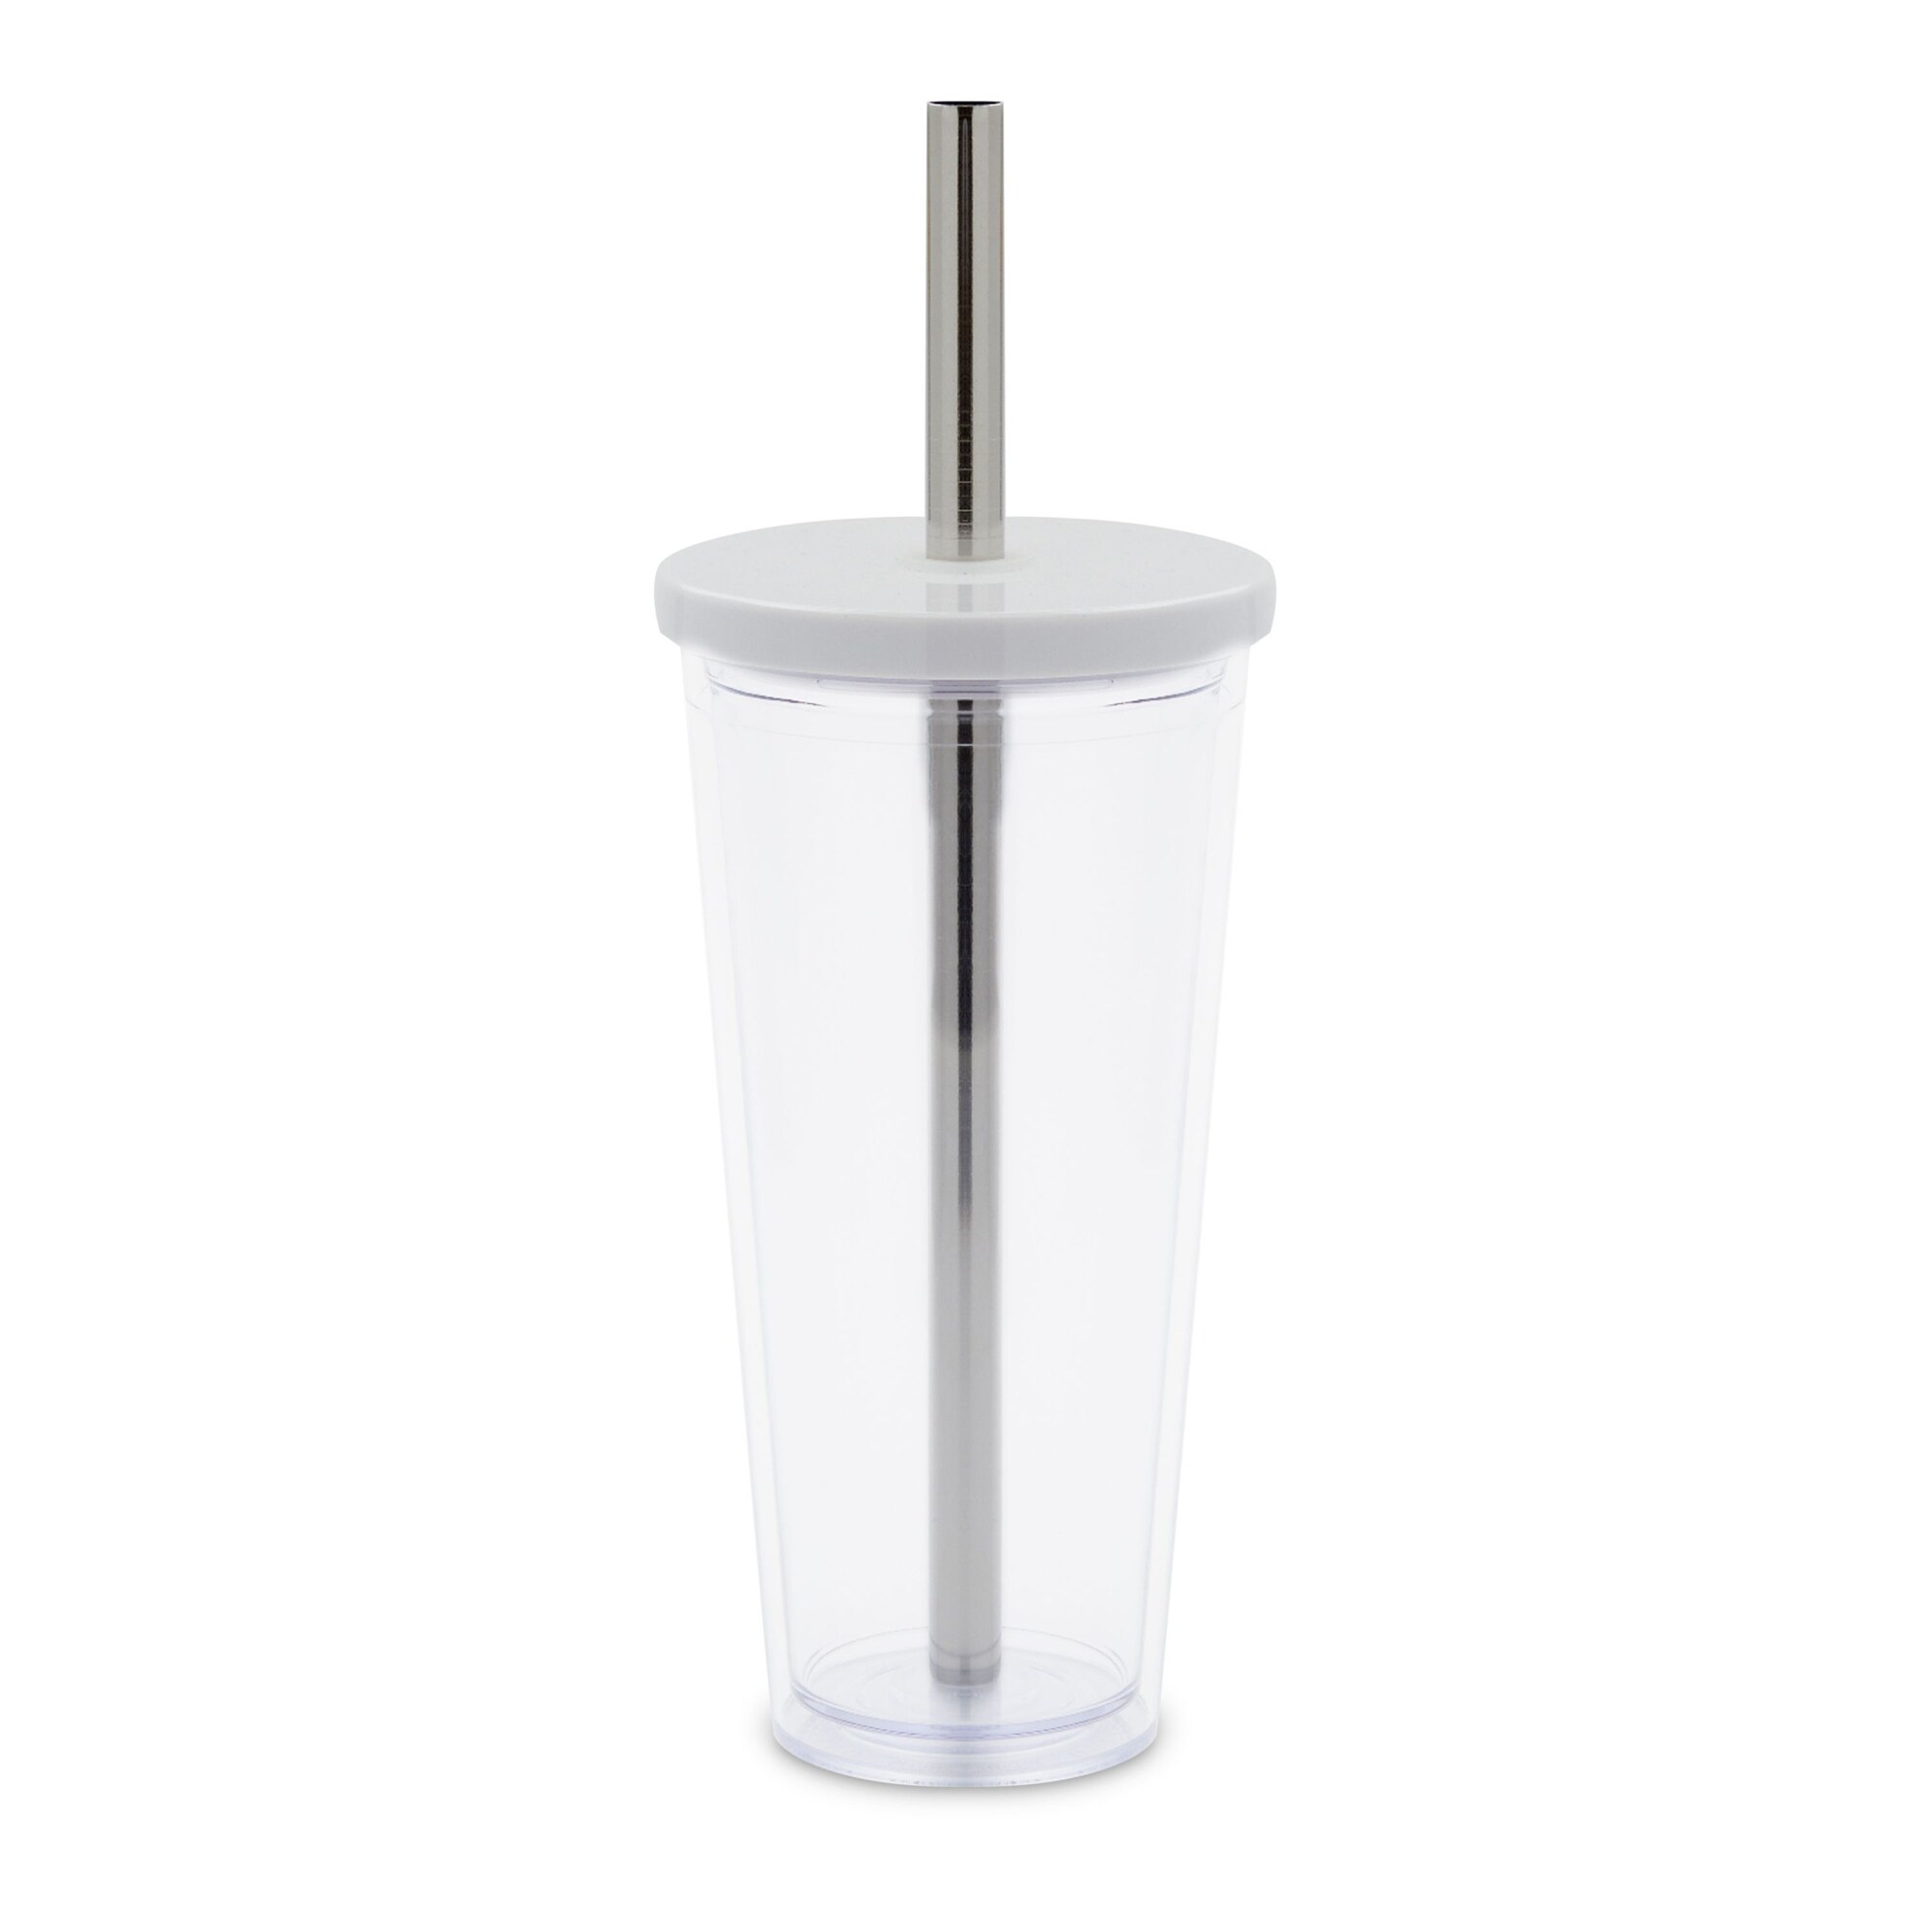 https://ak1.ostkcdn.com/images/products/is/images/direct/f2dad1abed2d74d2403a2f8150fc39cf262de792/Reusable-Boba-Tea-Tumbler-with-Lid-and-Straw-Set%2C-To-Go-Bubble-Tea-Cup-%2824-oz%29.jpg